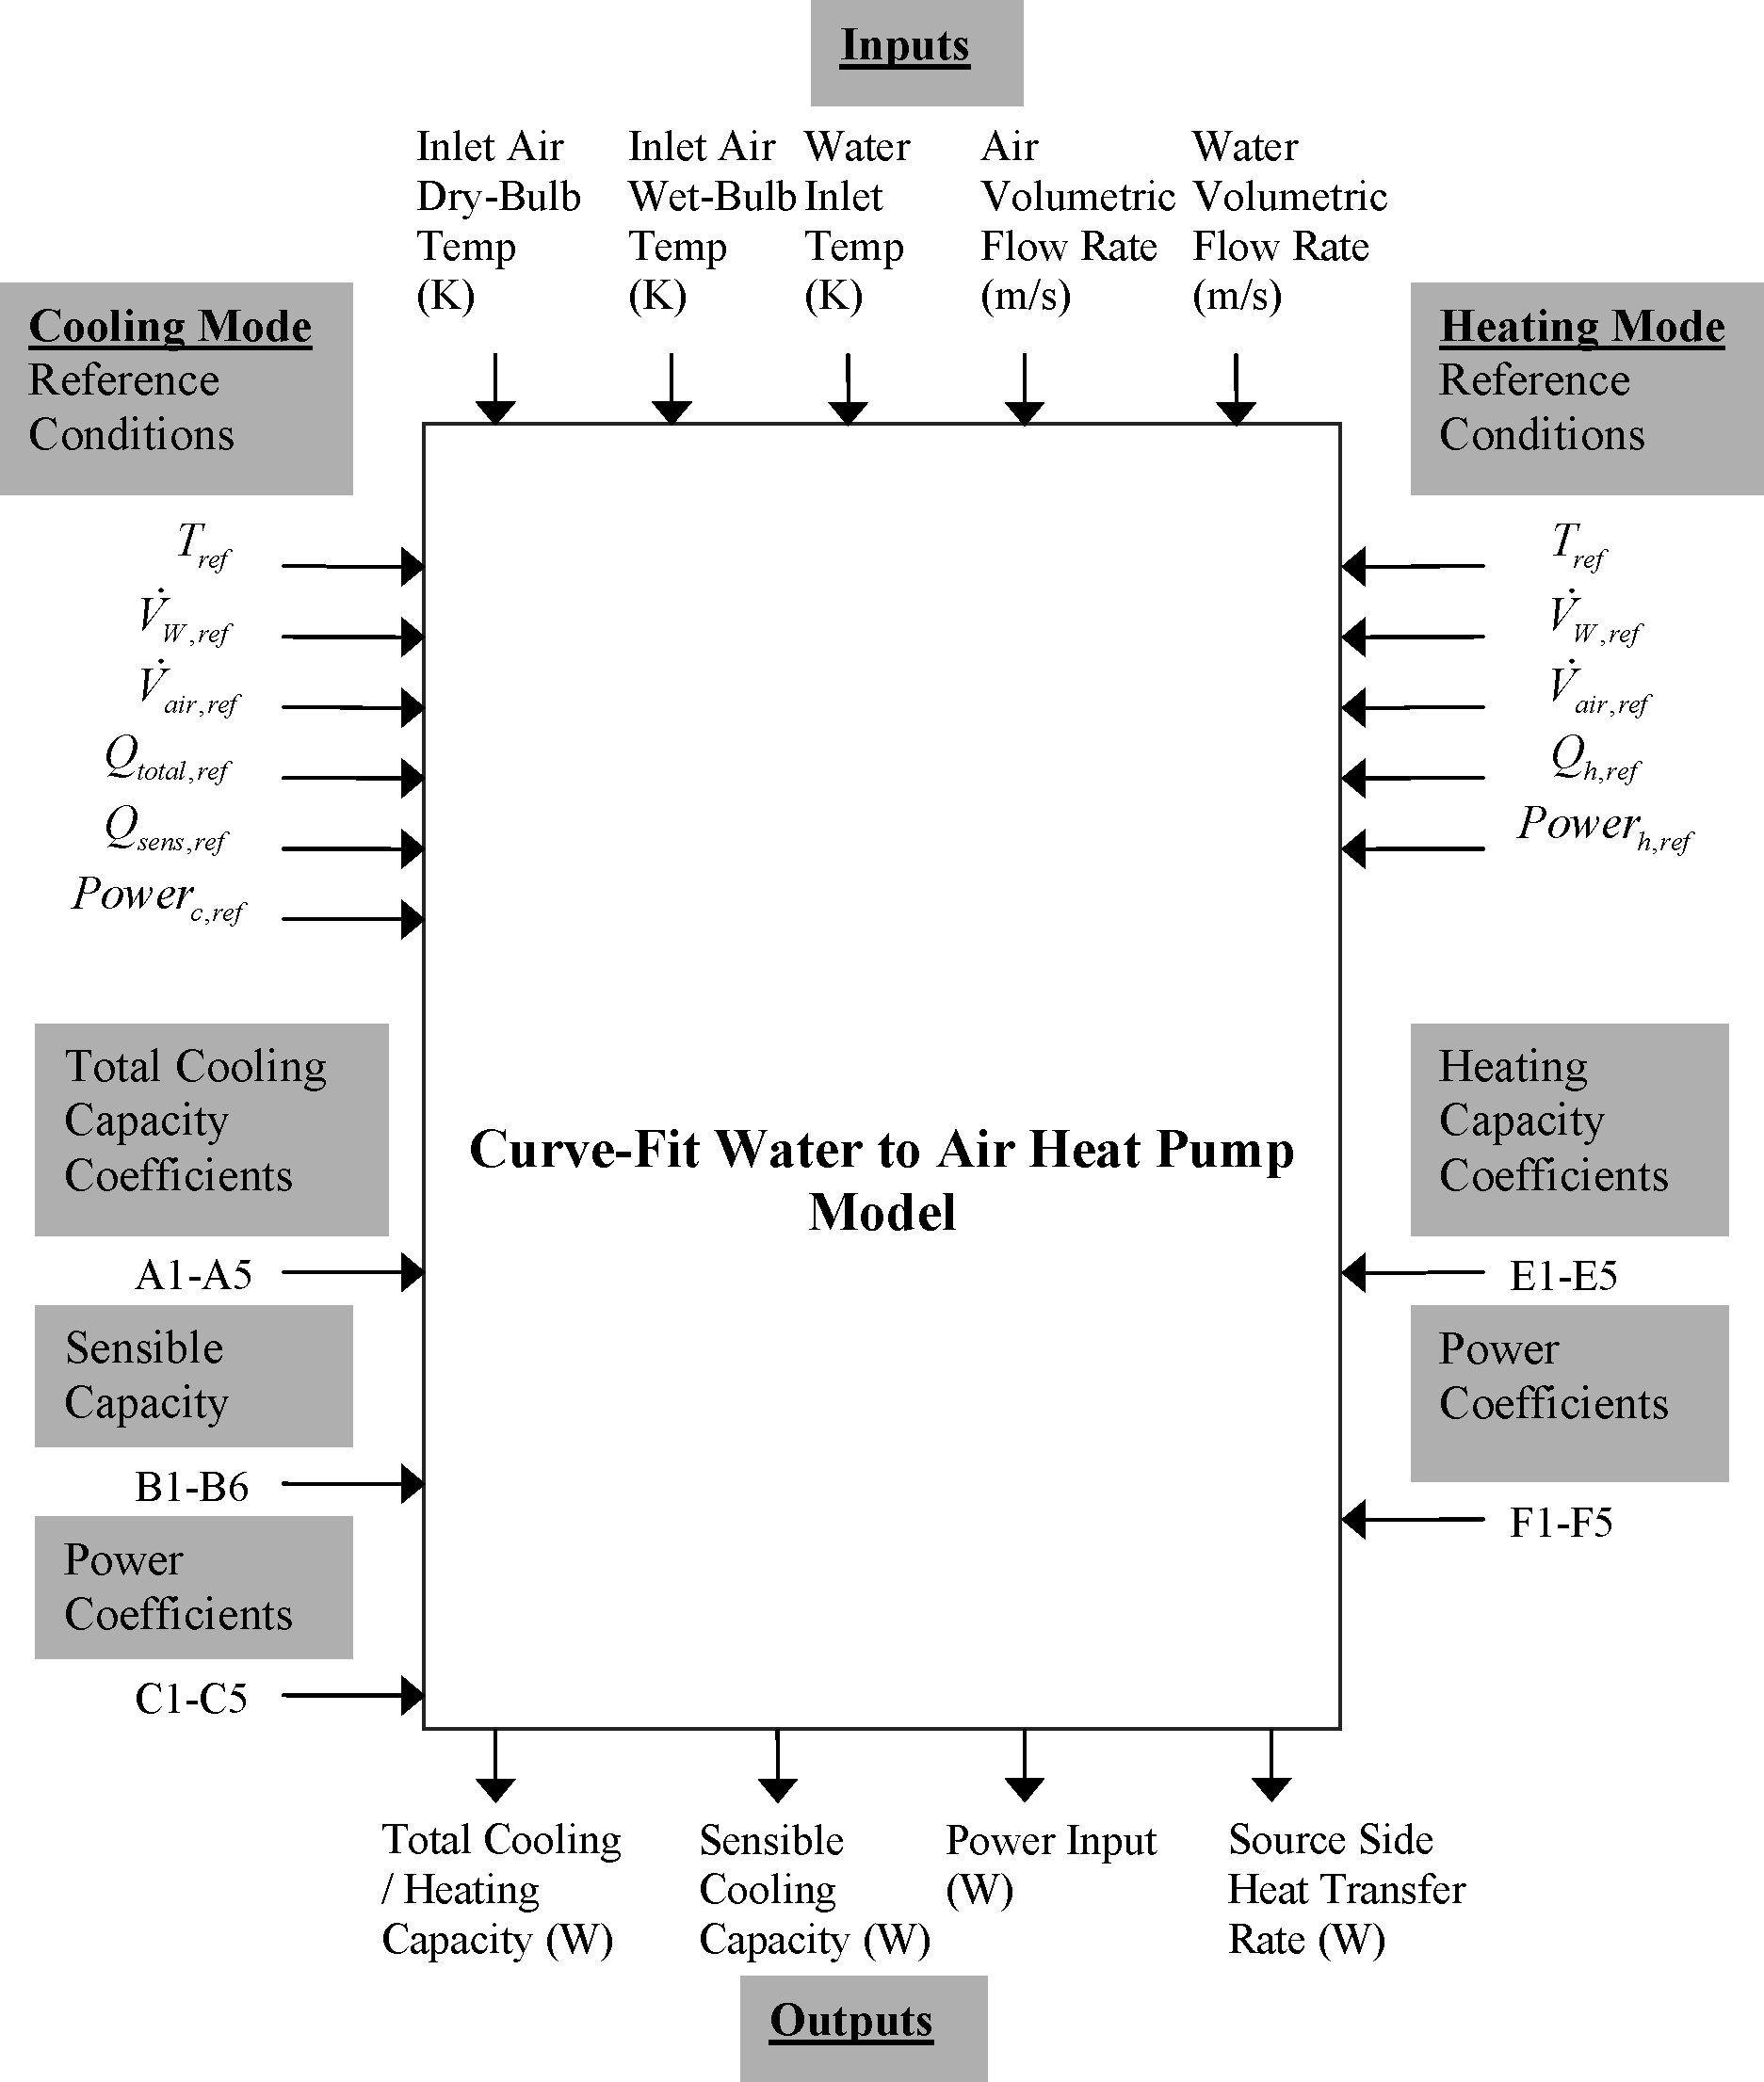 Information Flow Chart for Water-to-Air Heat Pump Equation Fit Model (Tang 2005) [fig:information-flow-chart-for-water-to-air-heat]